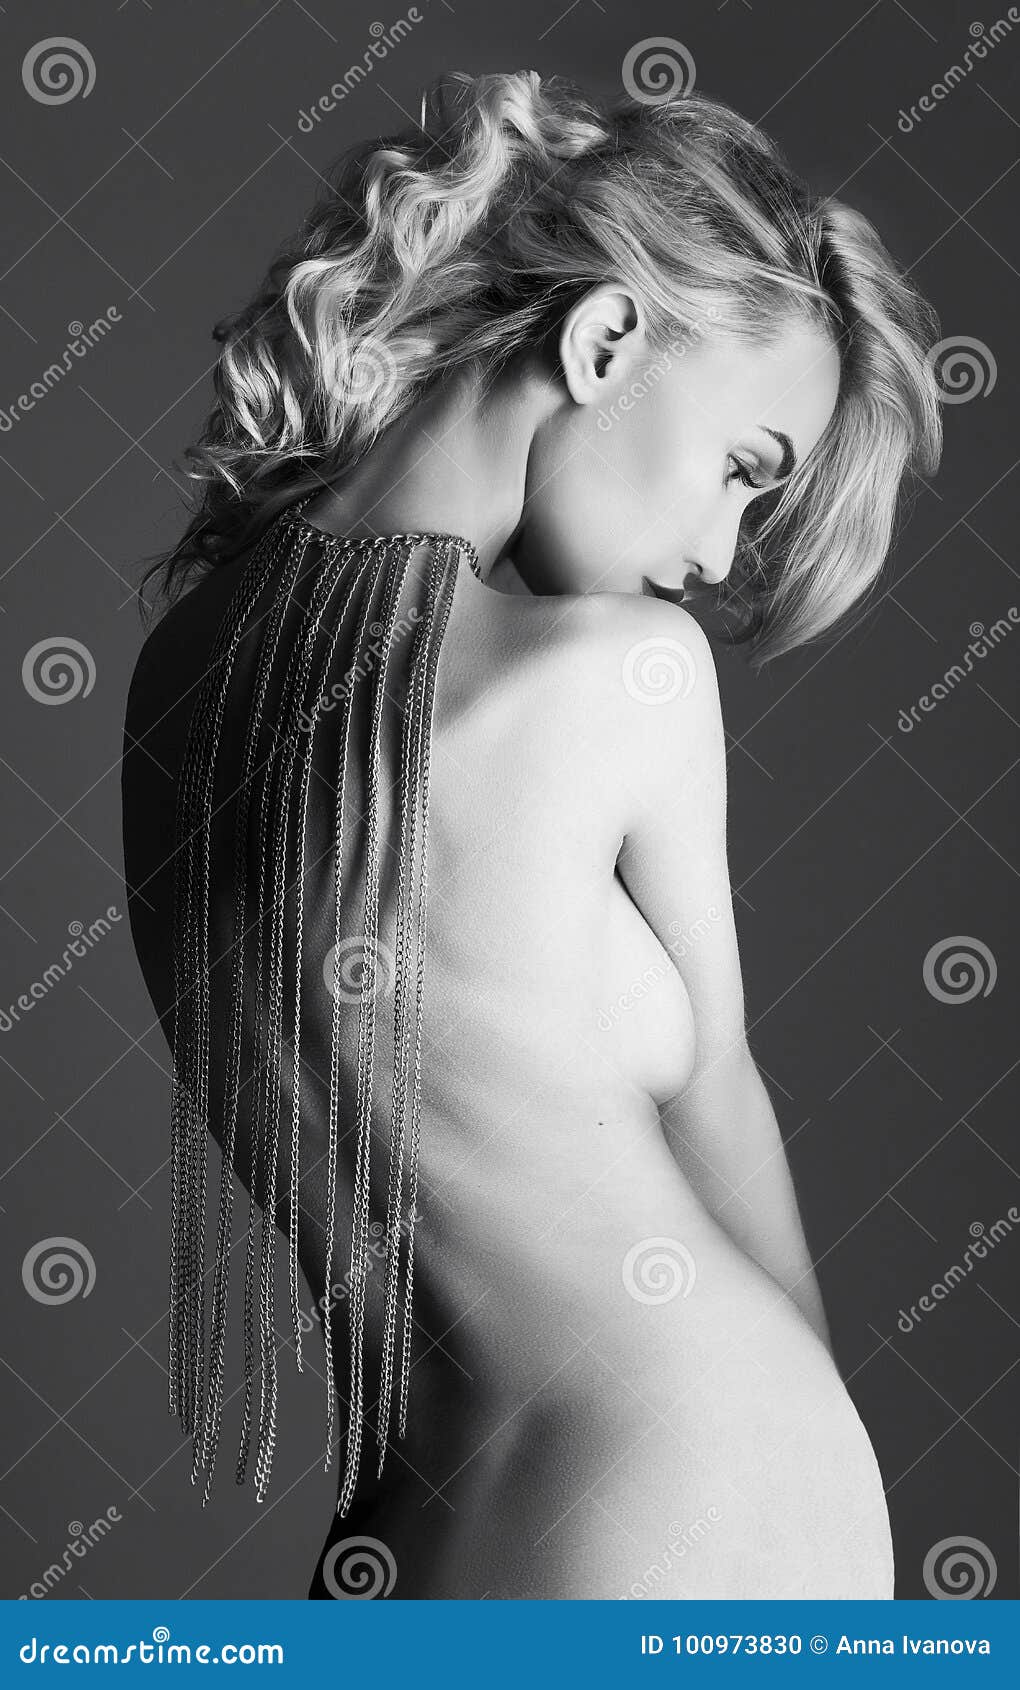 Blonde Perfect Girl Hd - Fashion Beauty Nude Blonde Woman On A Light Background. Girl ...